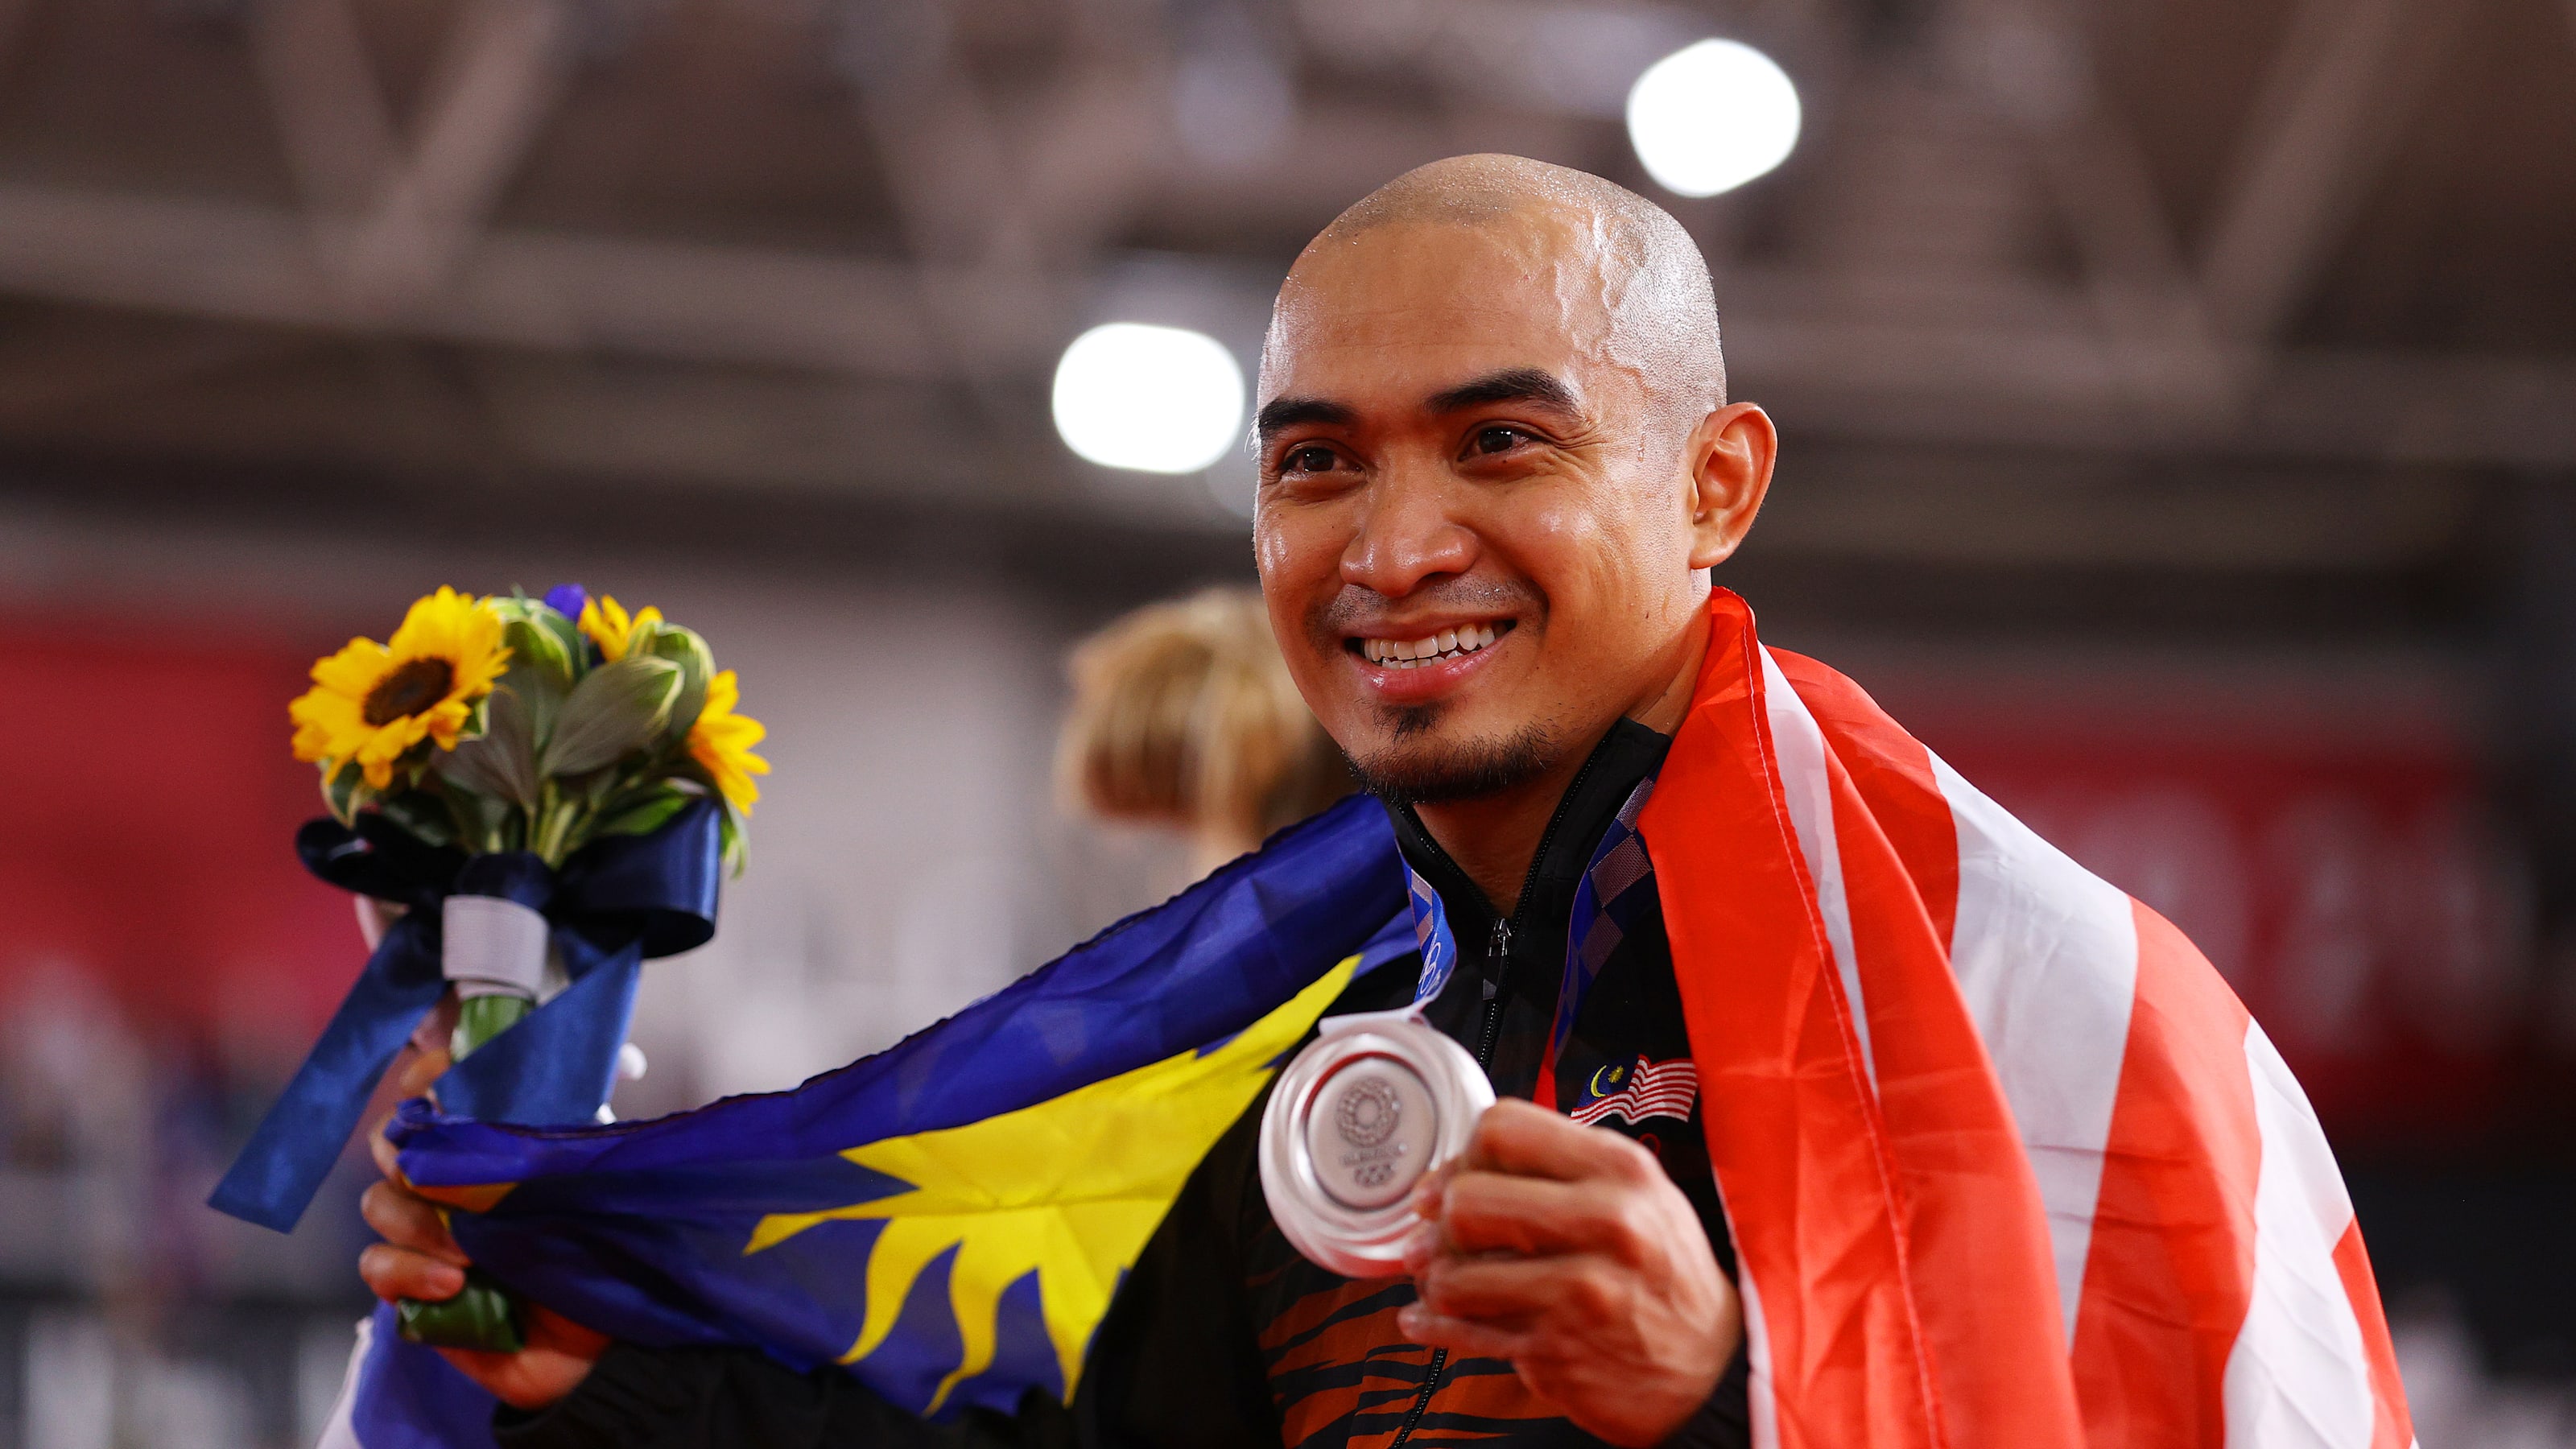 Malaysia at the olympics medals 2021